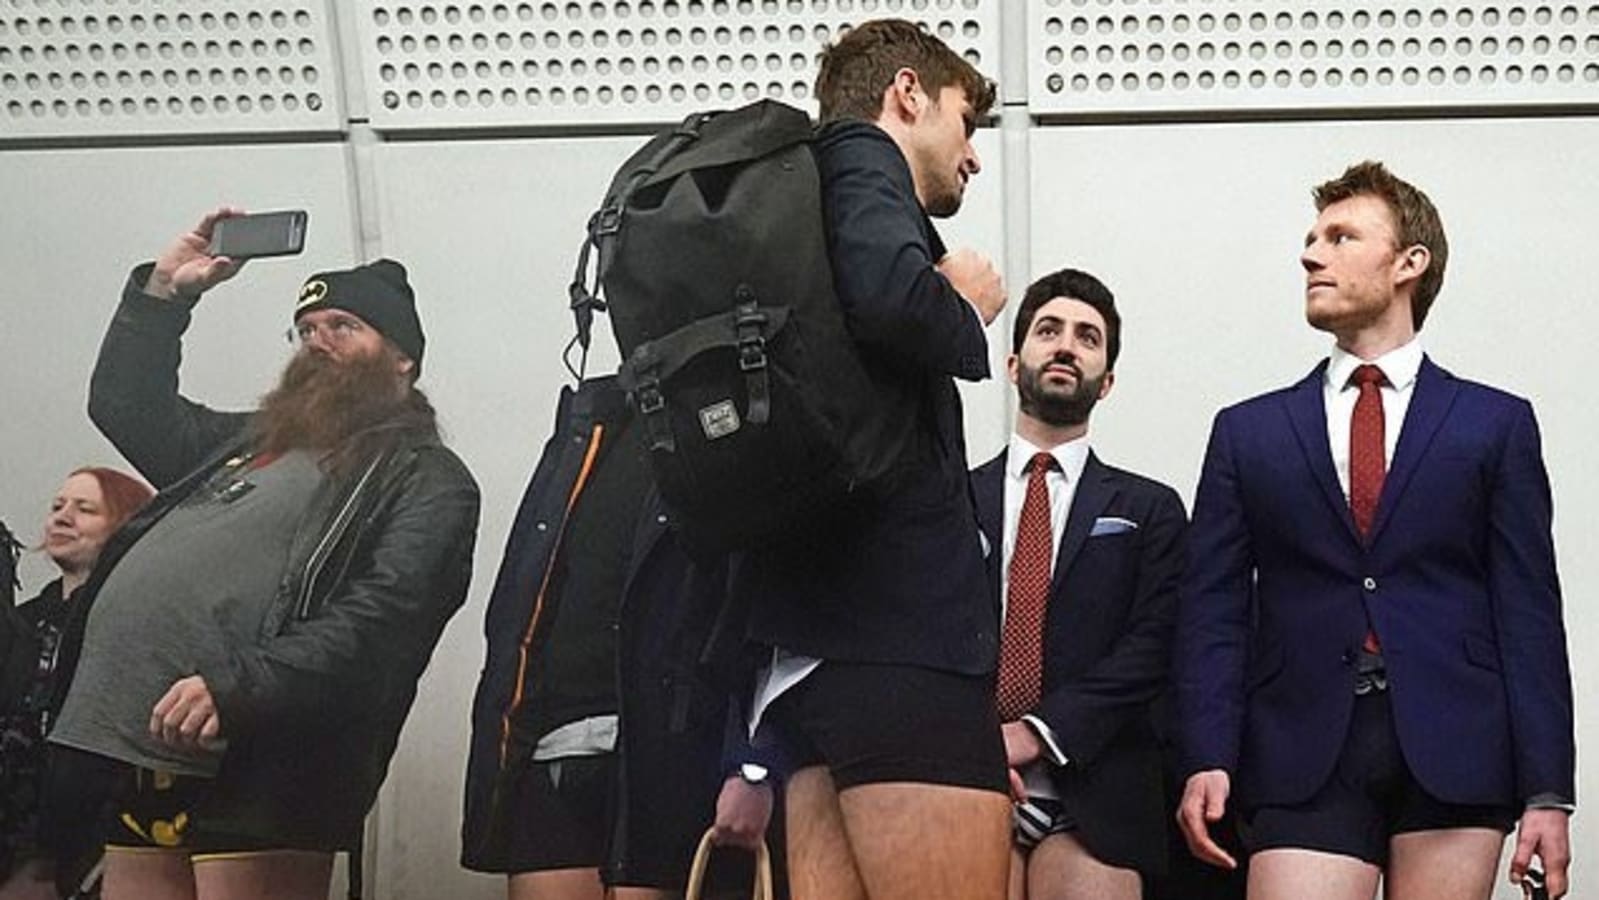 WATCH Londoners brave the cold for the annual No Trousers Tube Ride